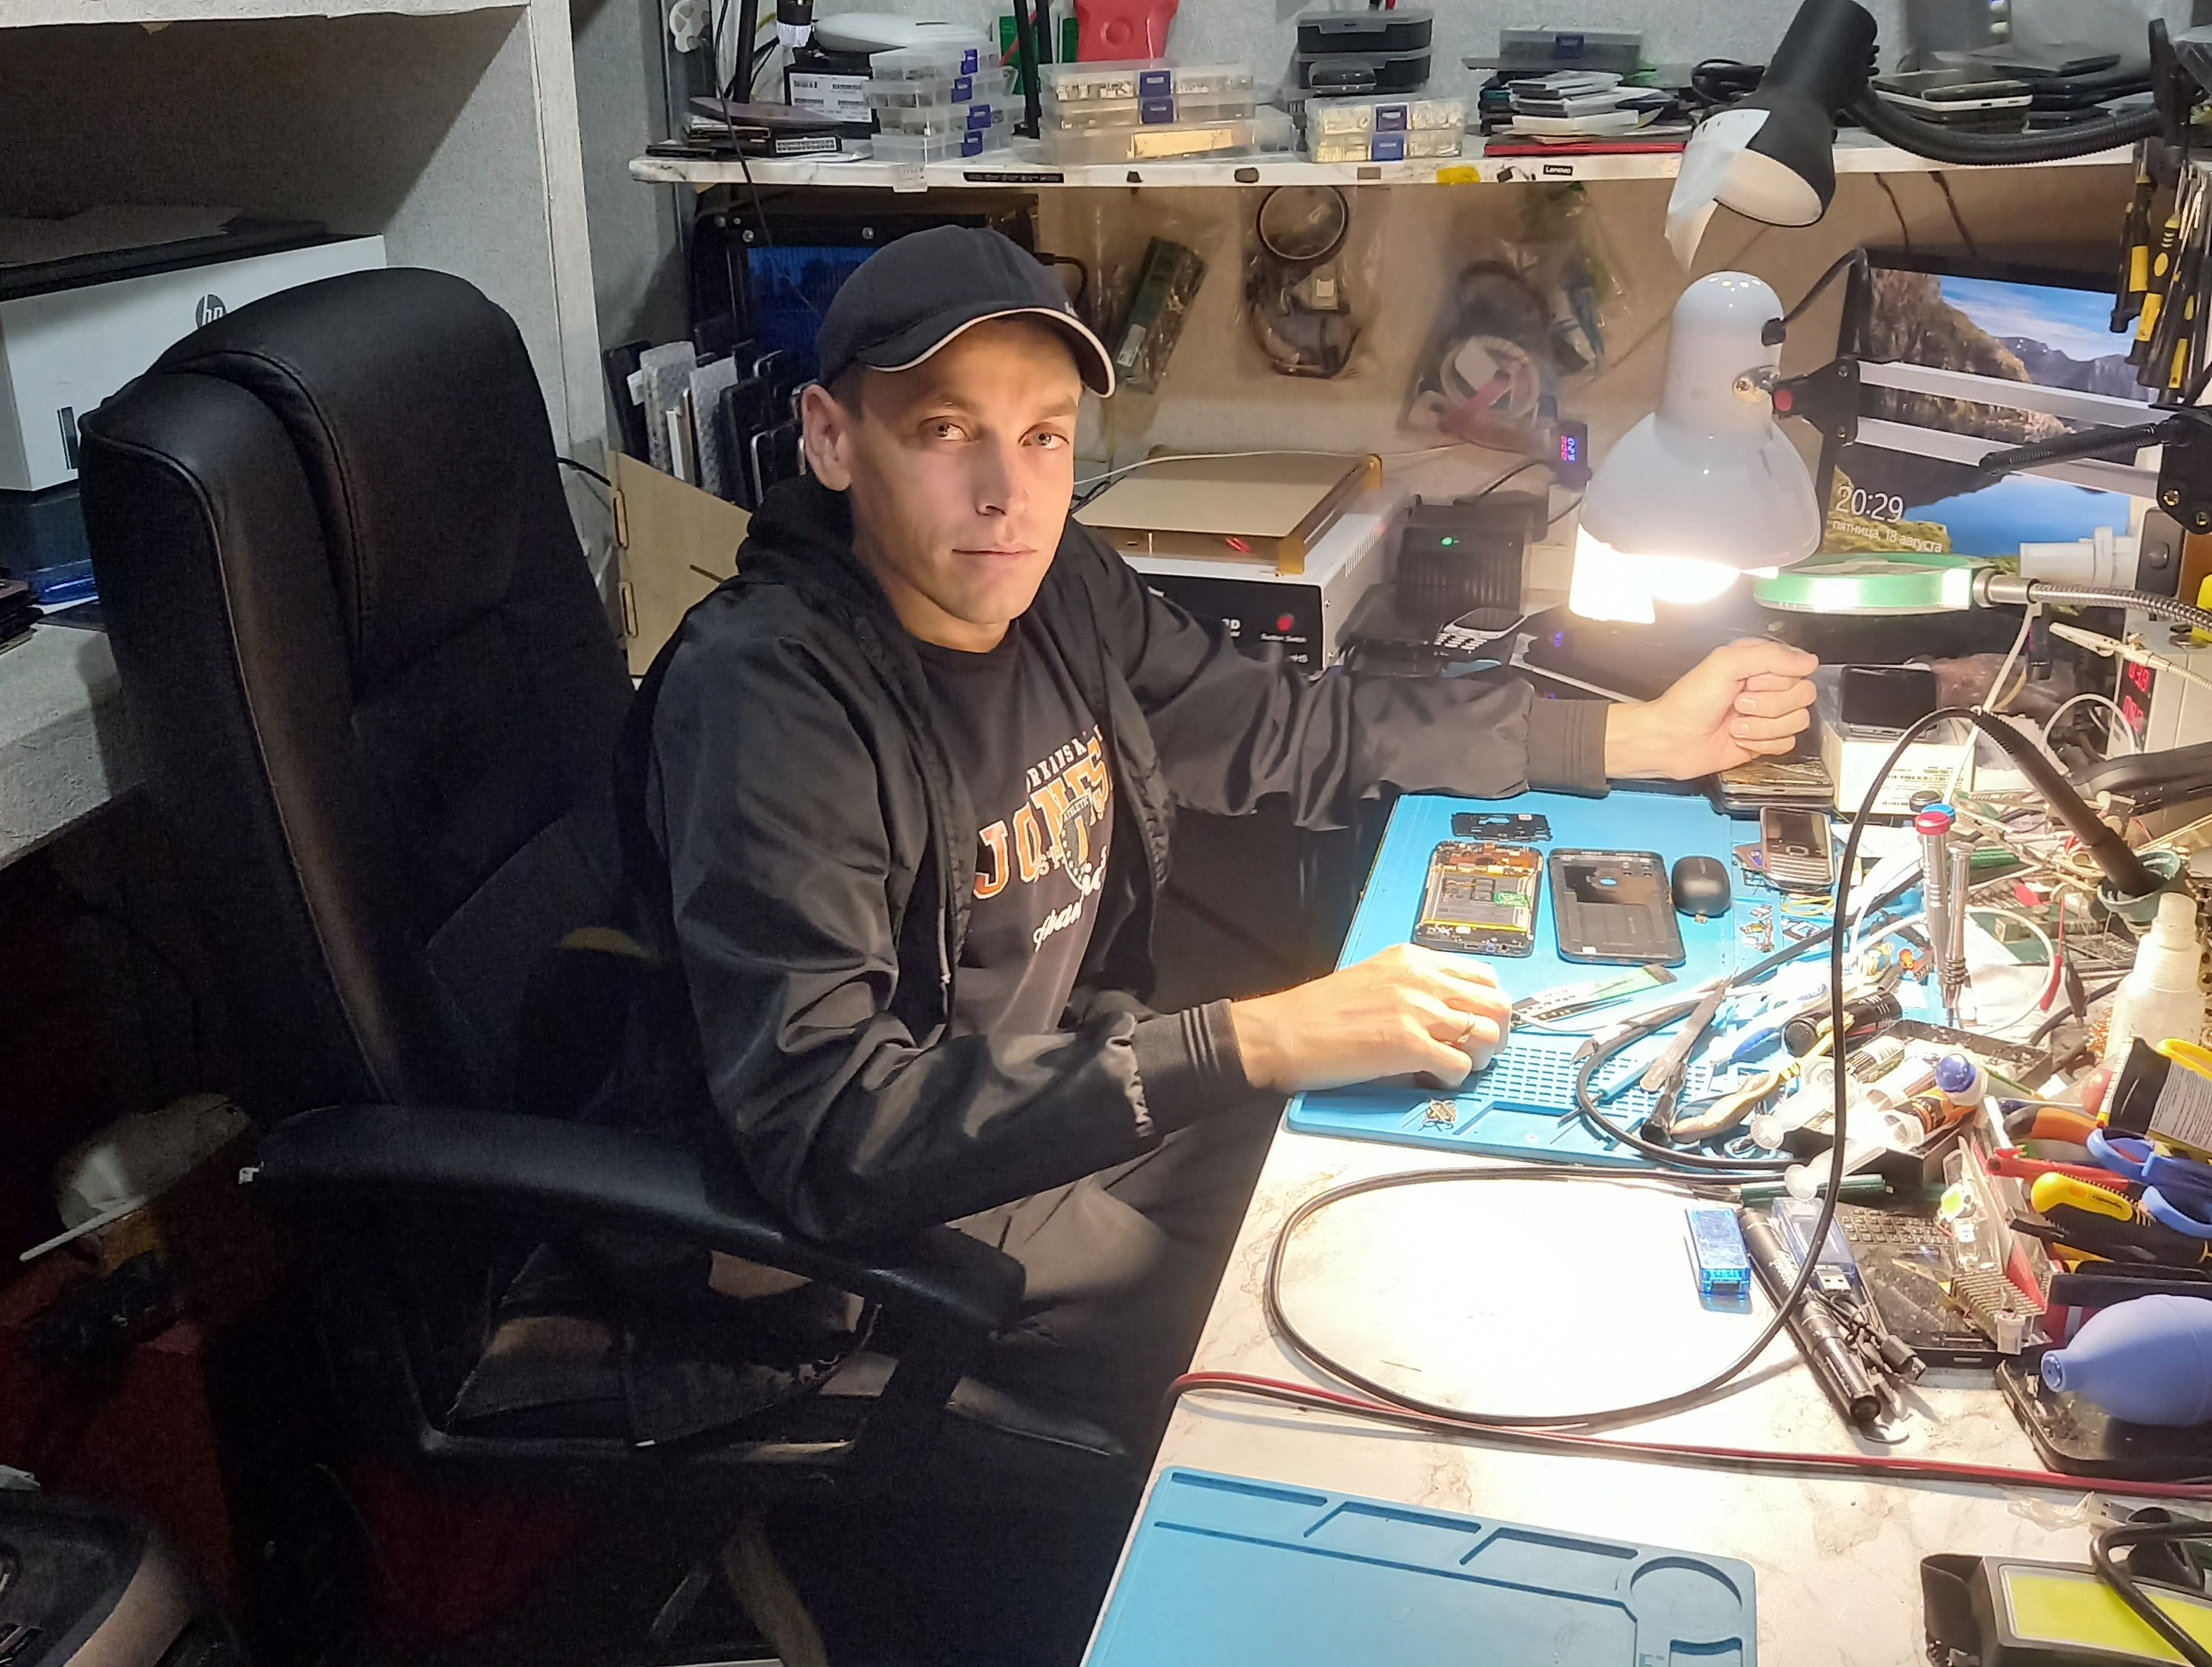 A man in a black shirt and cap sits at a desk where he assembles and disassembles a cell phone under a light.